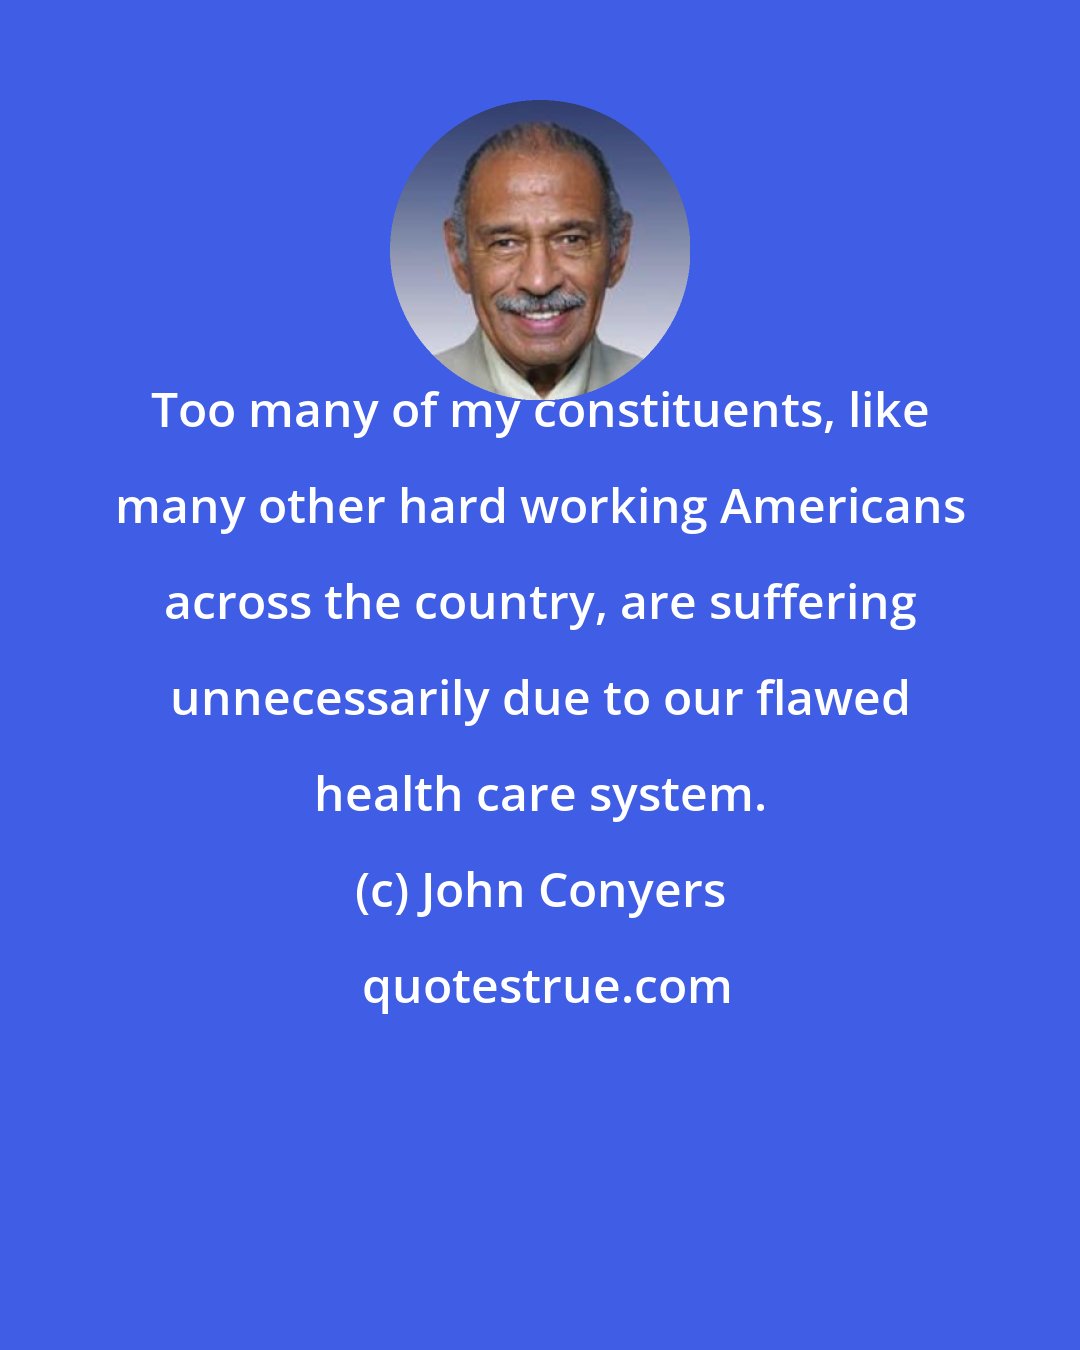 John Conyers: Too many of my constituents, like many other hard working Americans across the country, are suffering unnecessarily due to our flawed health care system.